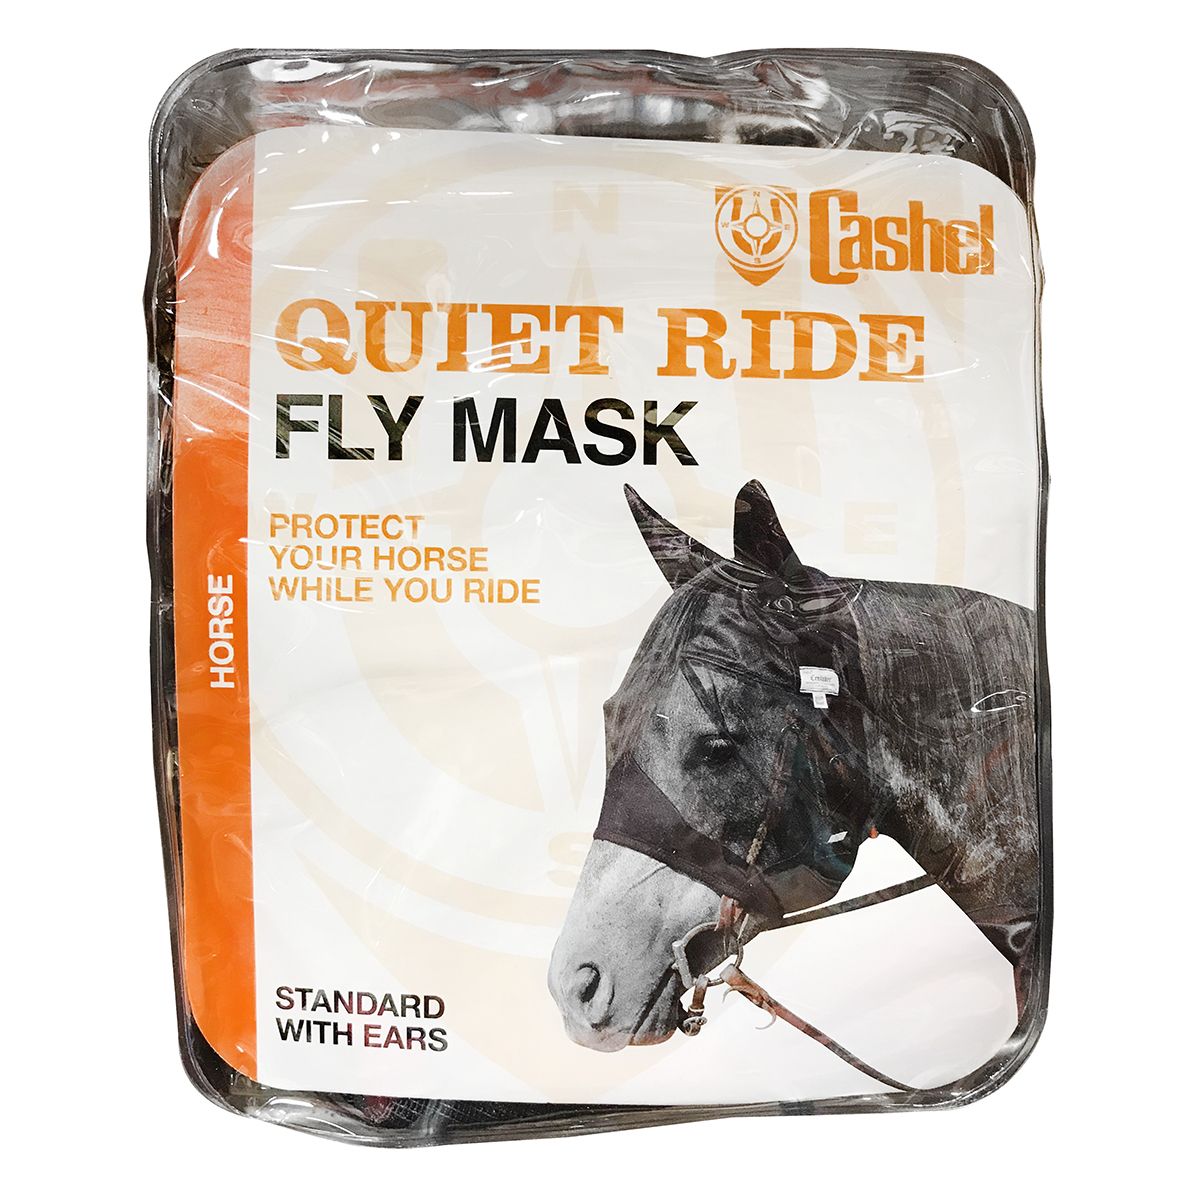 Quiet Ride Standard Nose Pasture Fly Mask with Ears - Horse, Black